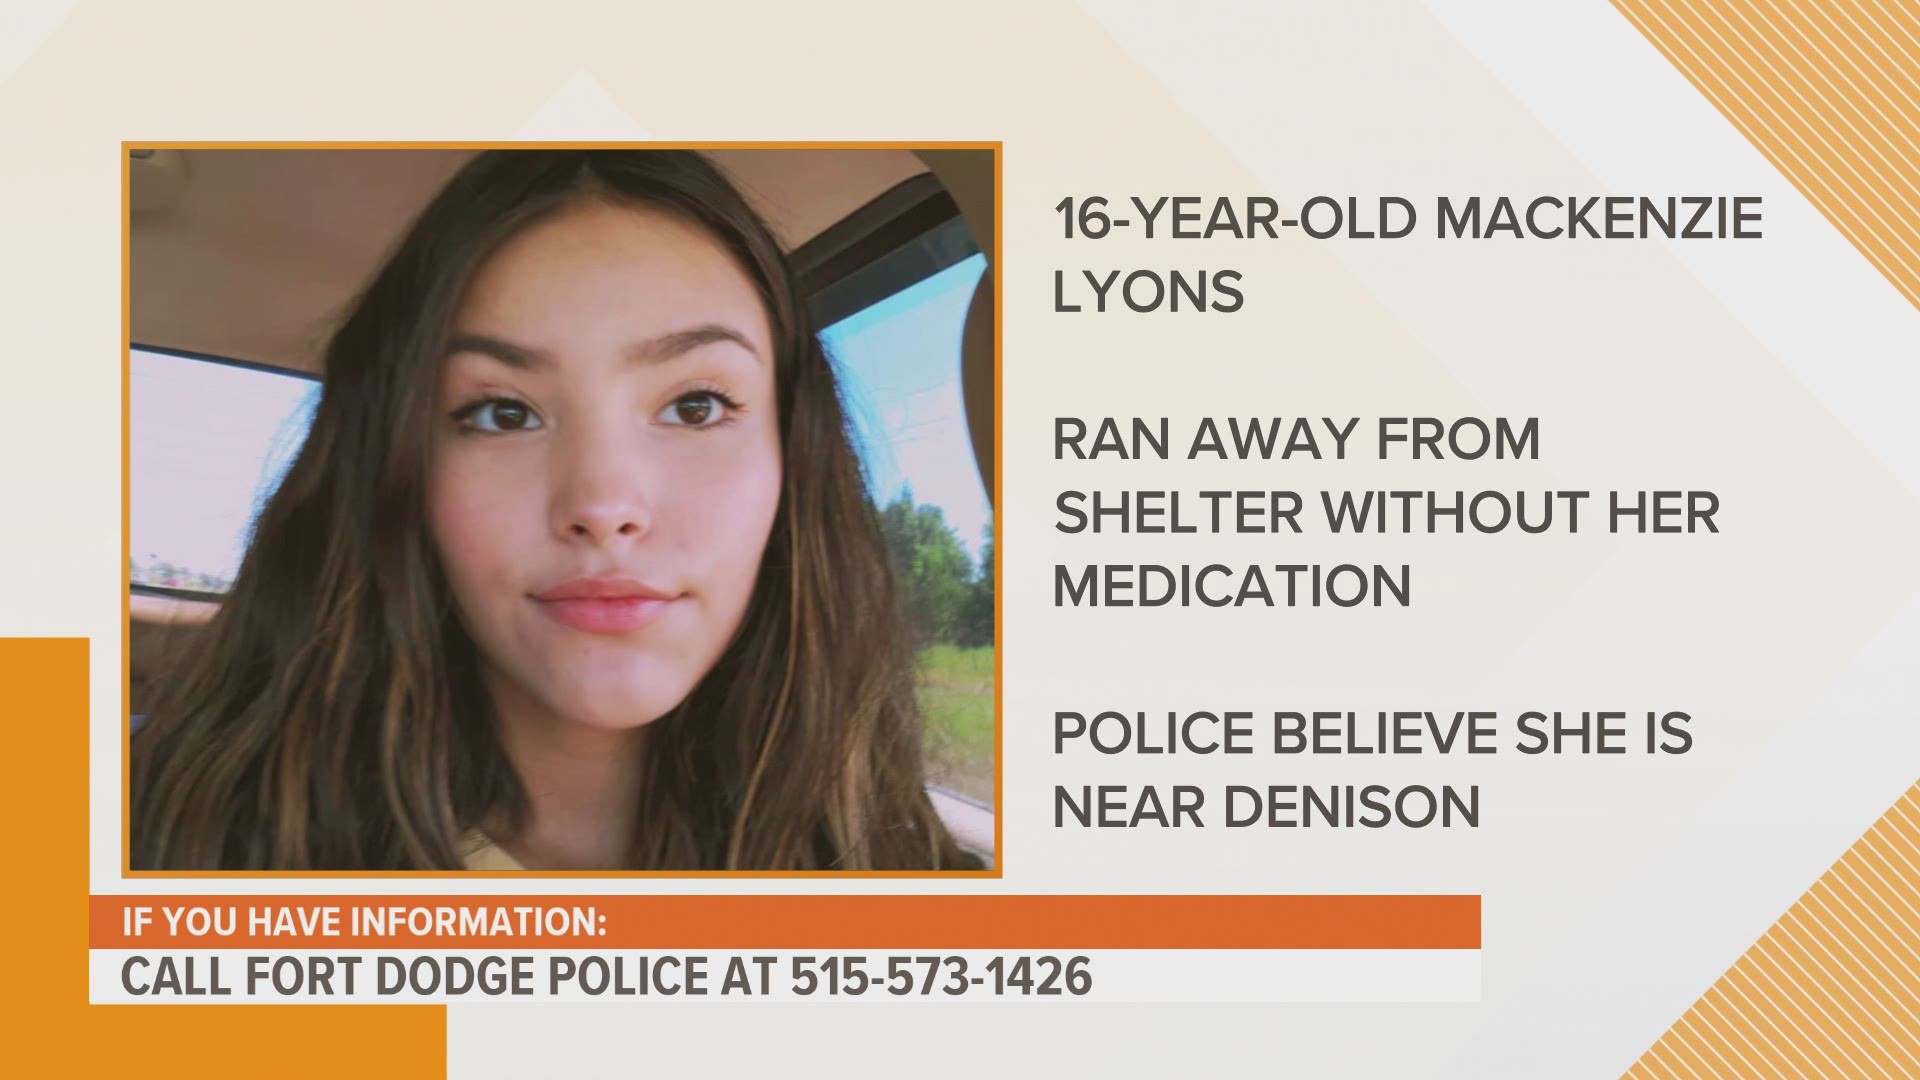 16-year-old Mackenzie Lyons ran away without the medicine she needs for an undisclosed condition, according to the Fort Dodge Police Department.